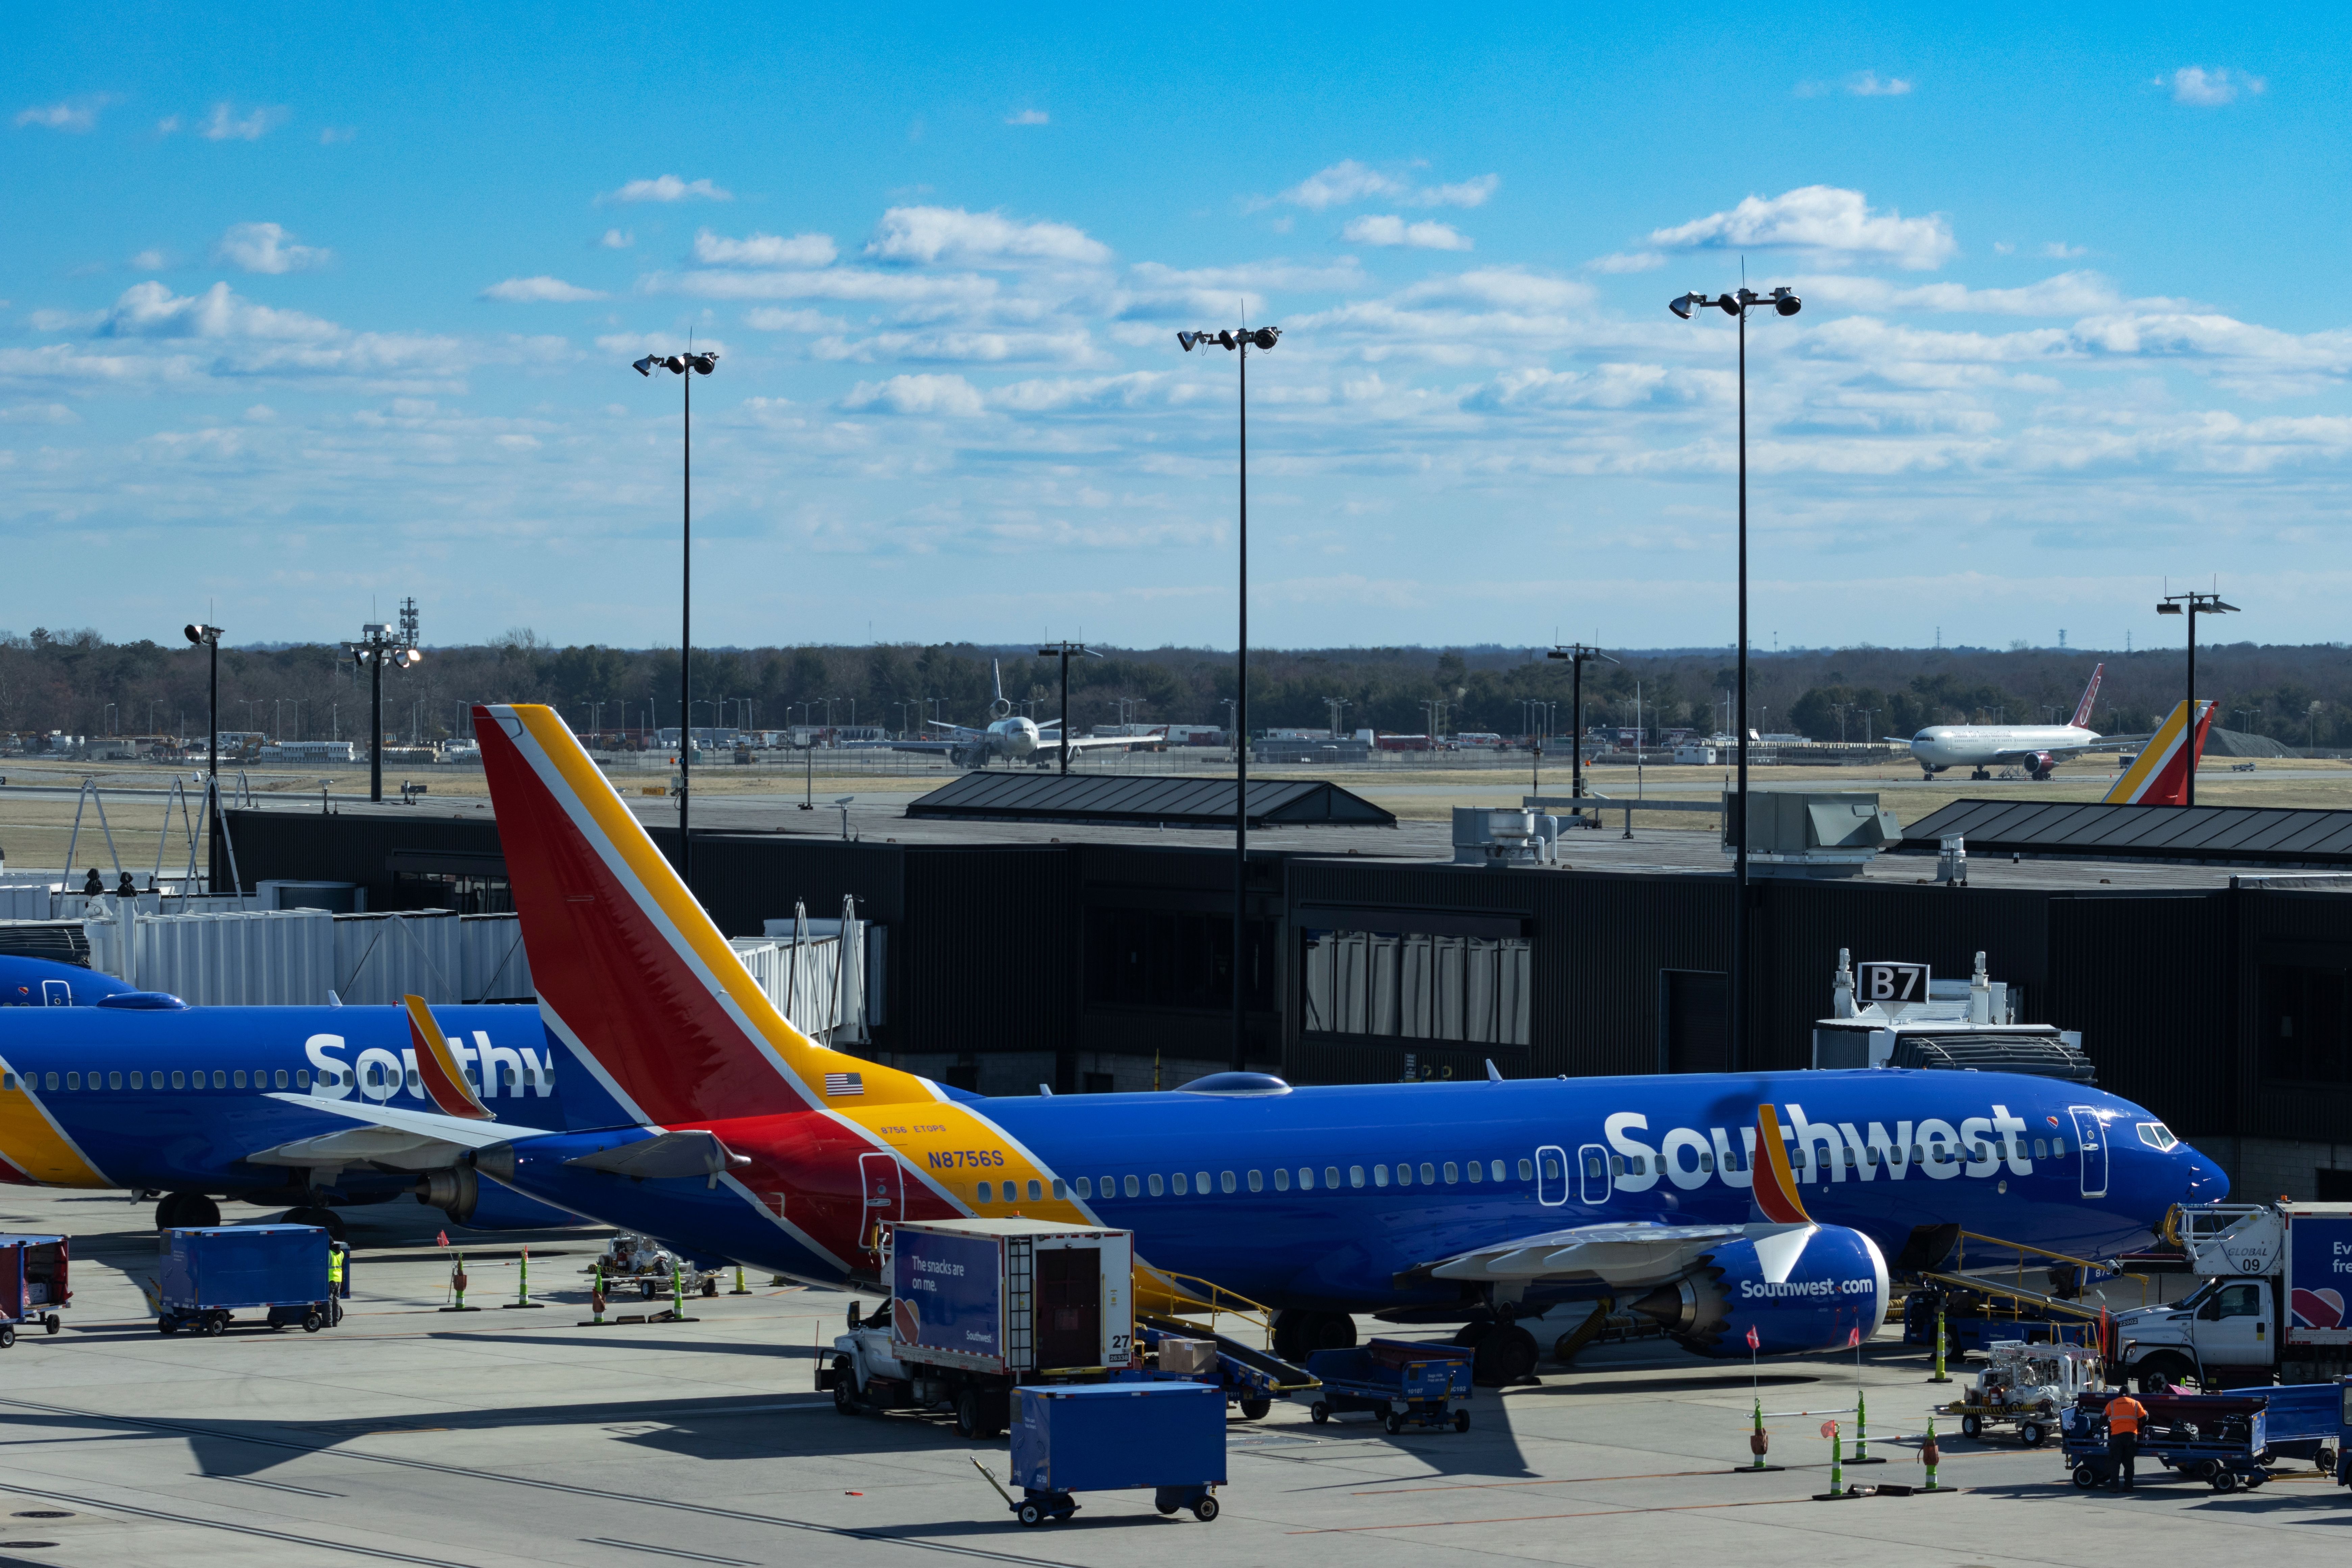 Two Southwest Airliines Aircraft at BWI Airport.